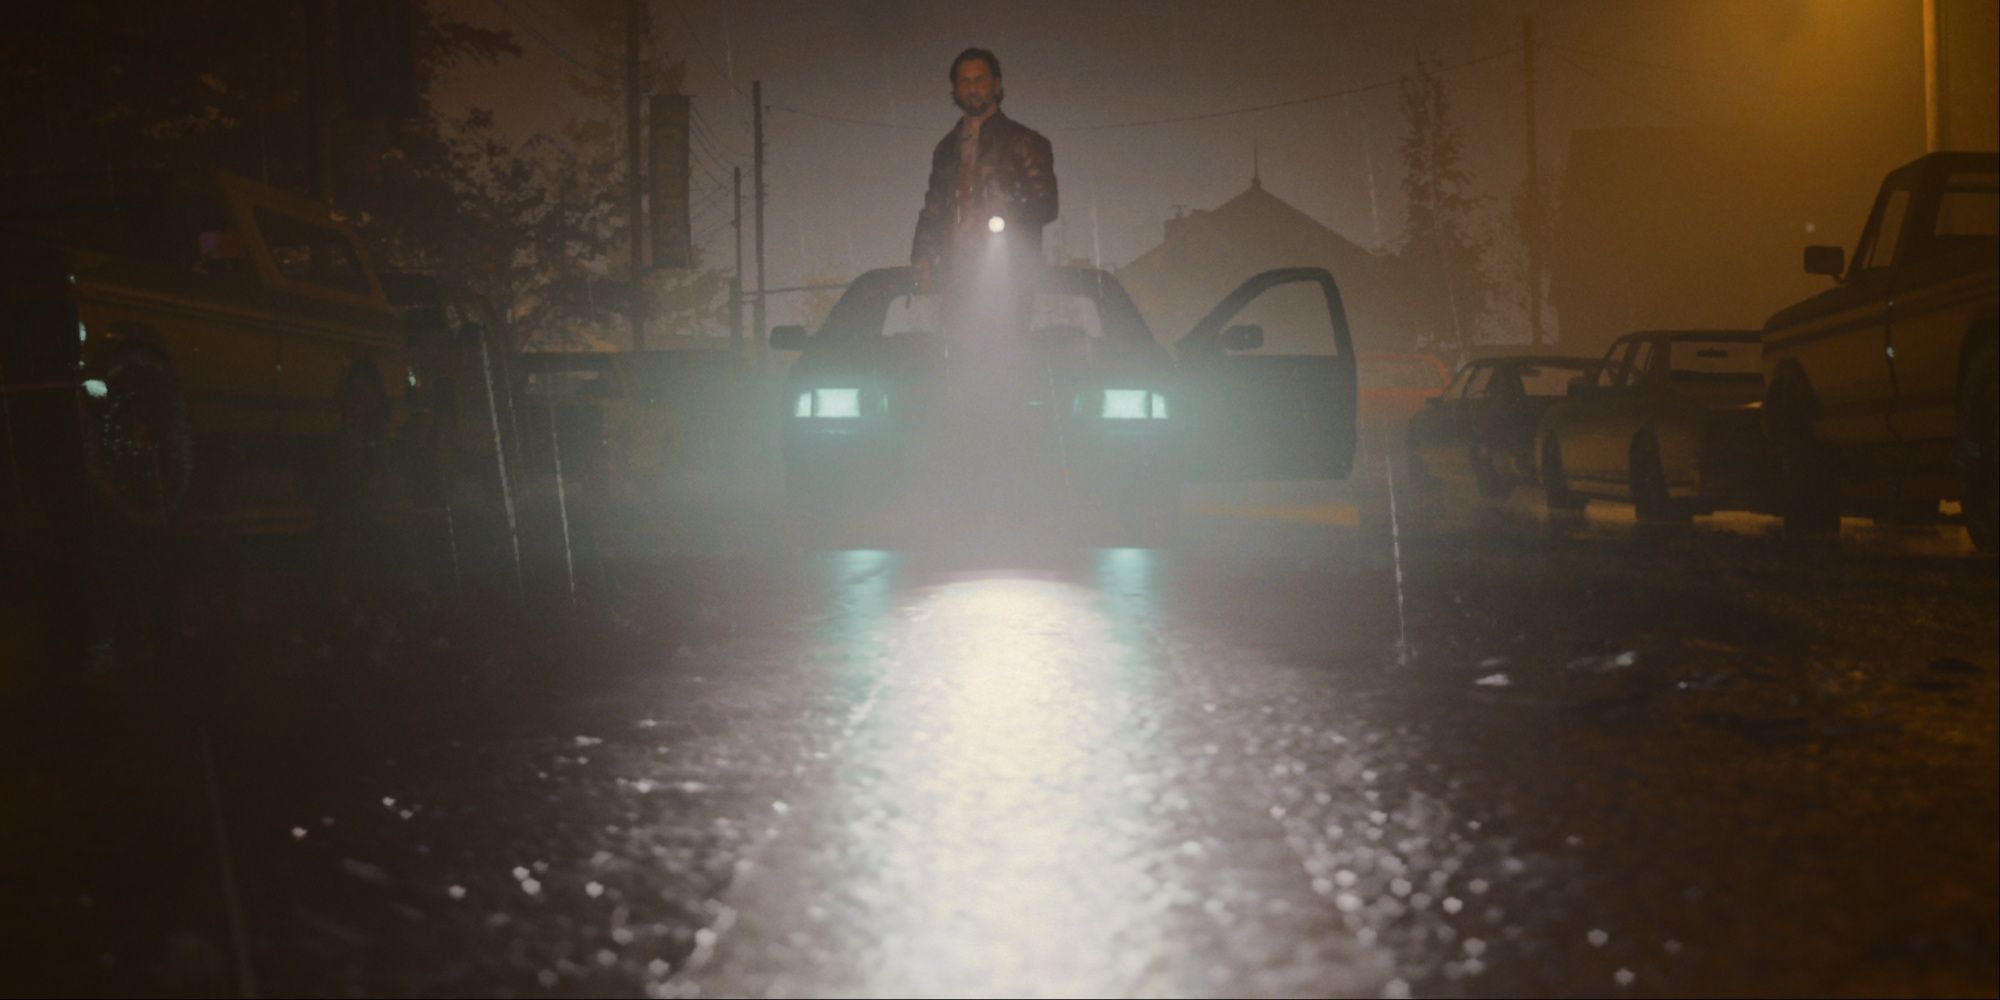 Alan exiting his car to enter the overlap leading to Deerfest striking the same pose with gun and flashlight as the cover art for the first game.